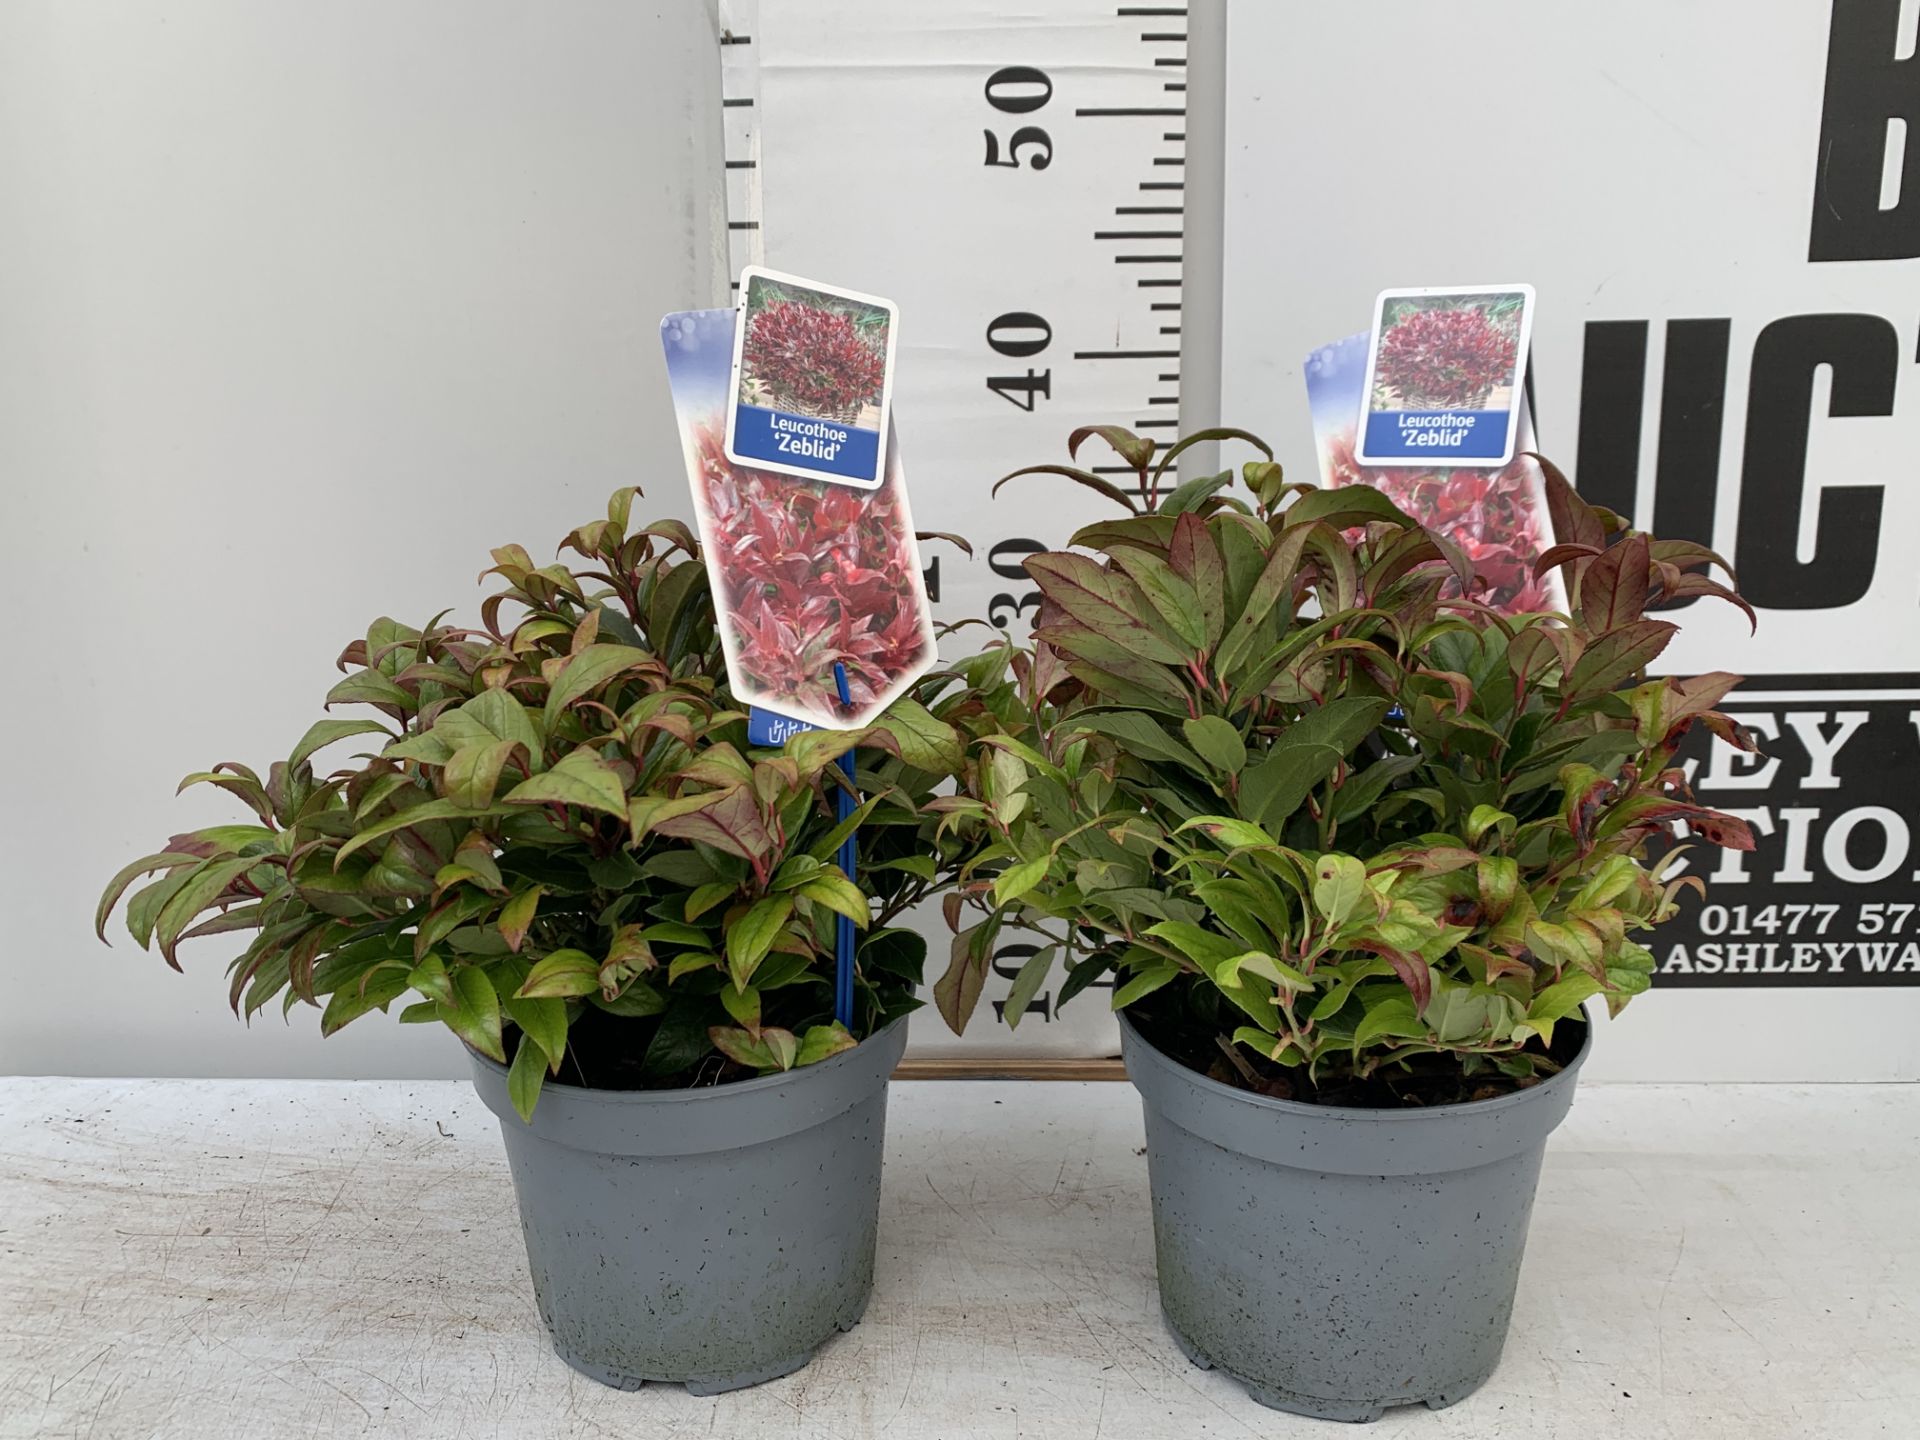 TWO LEUCOTHOE ZEBLID IN 2 LTR POTS 35CM TALL PLUS VAT TO BE SOLD FOR THE TWO